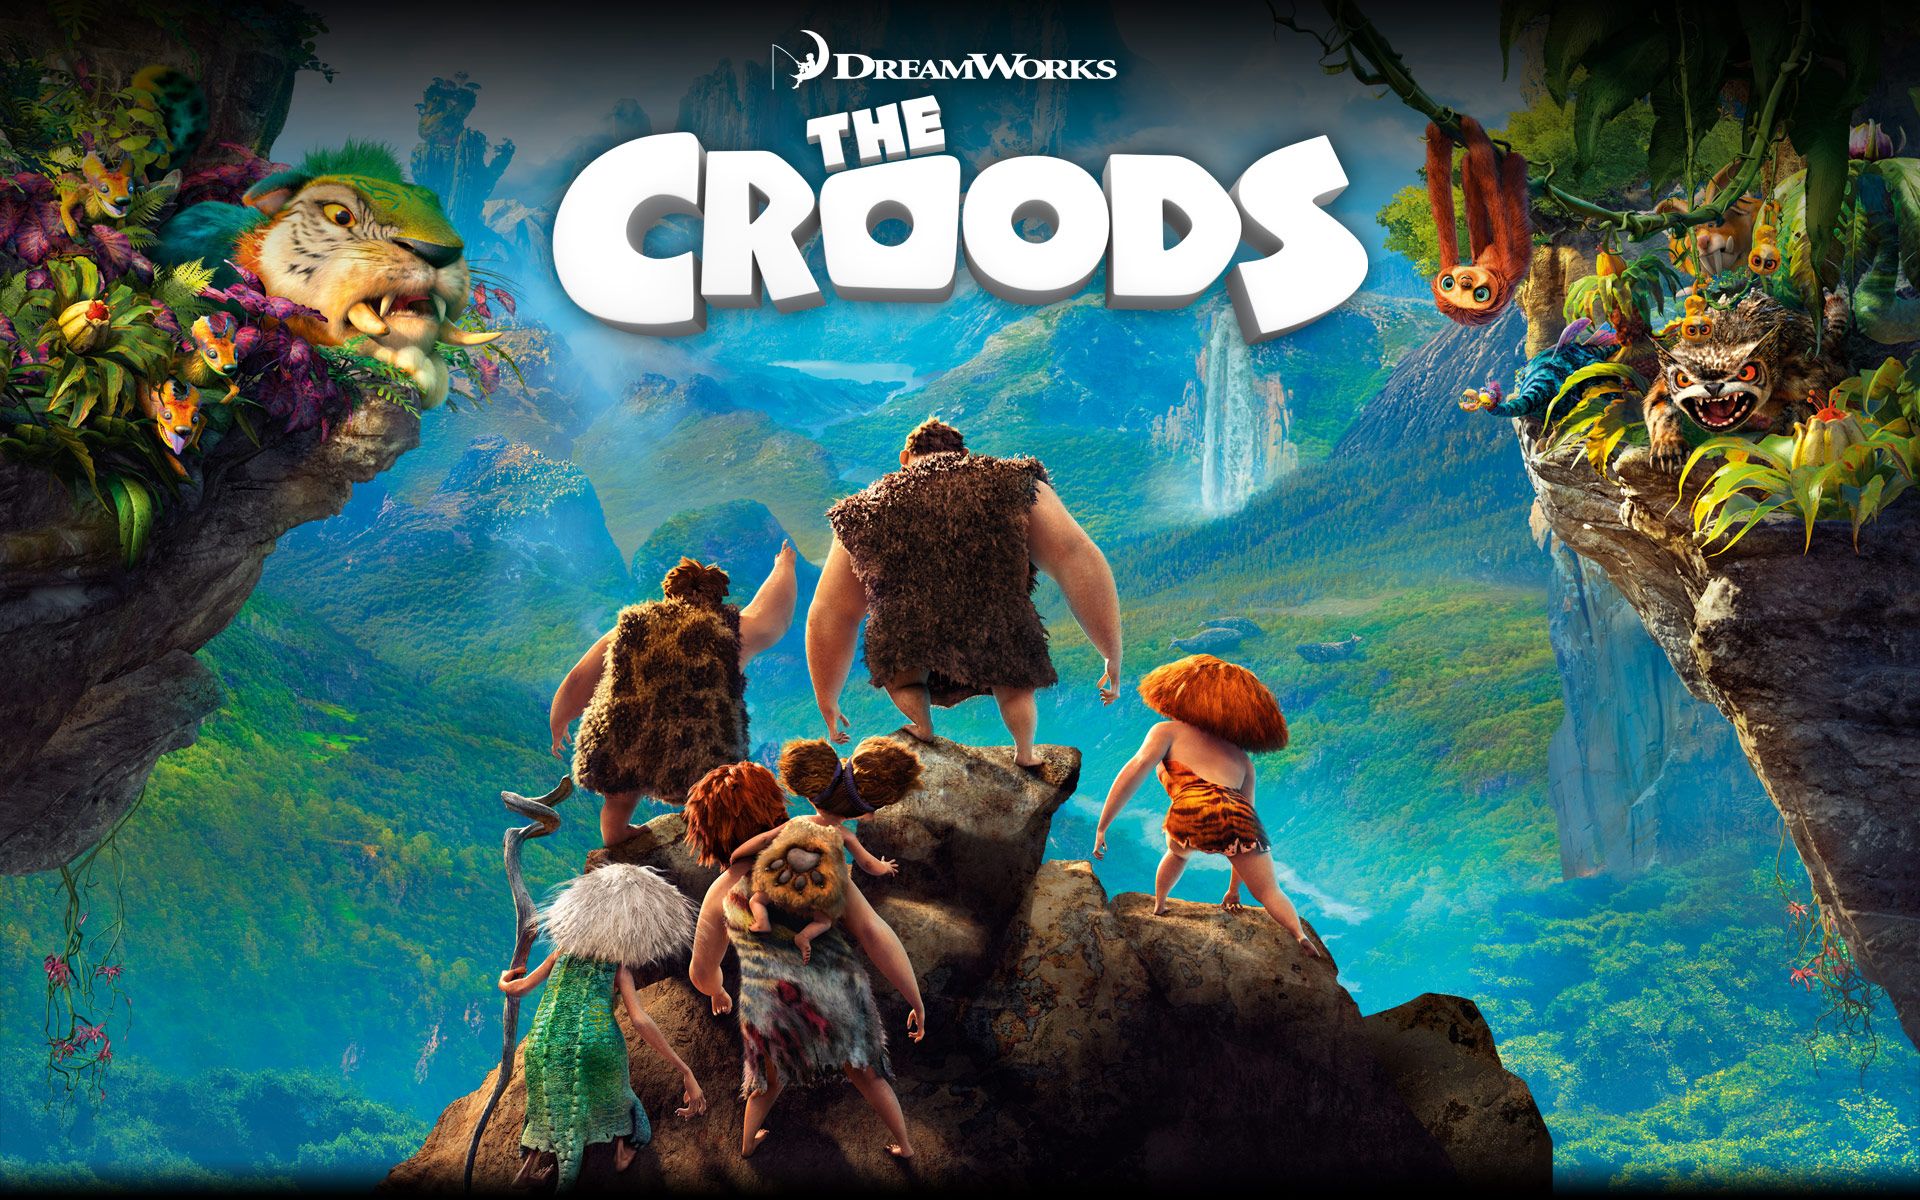 The Croods is anything but prehistoric